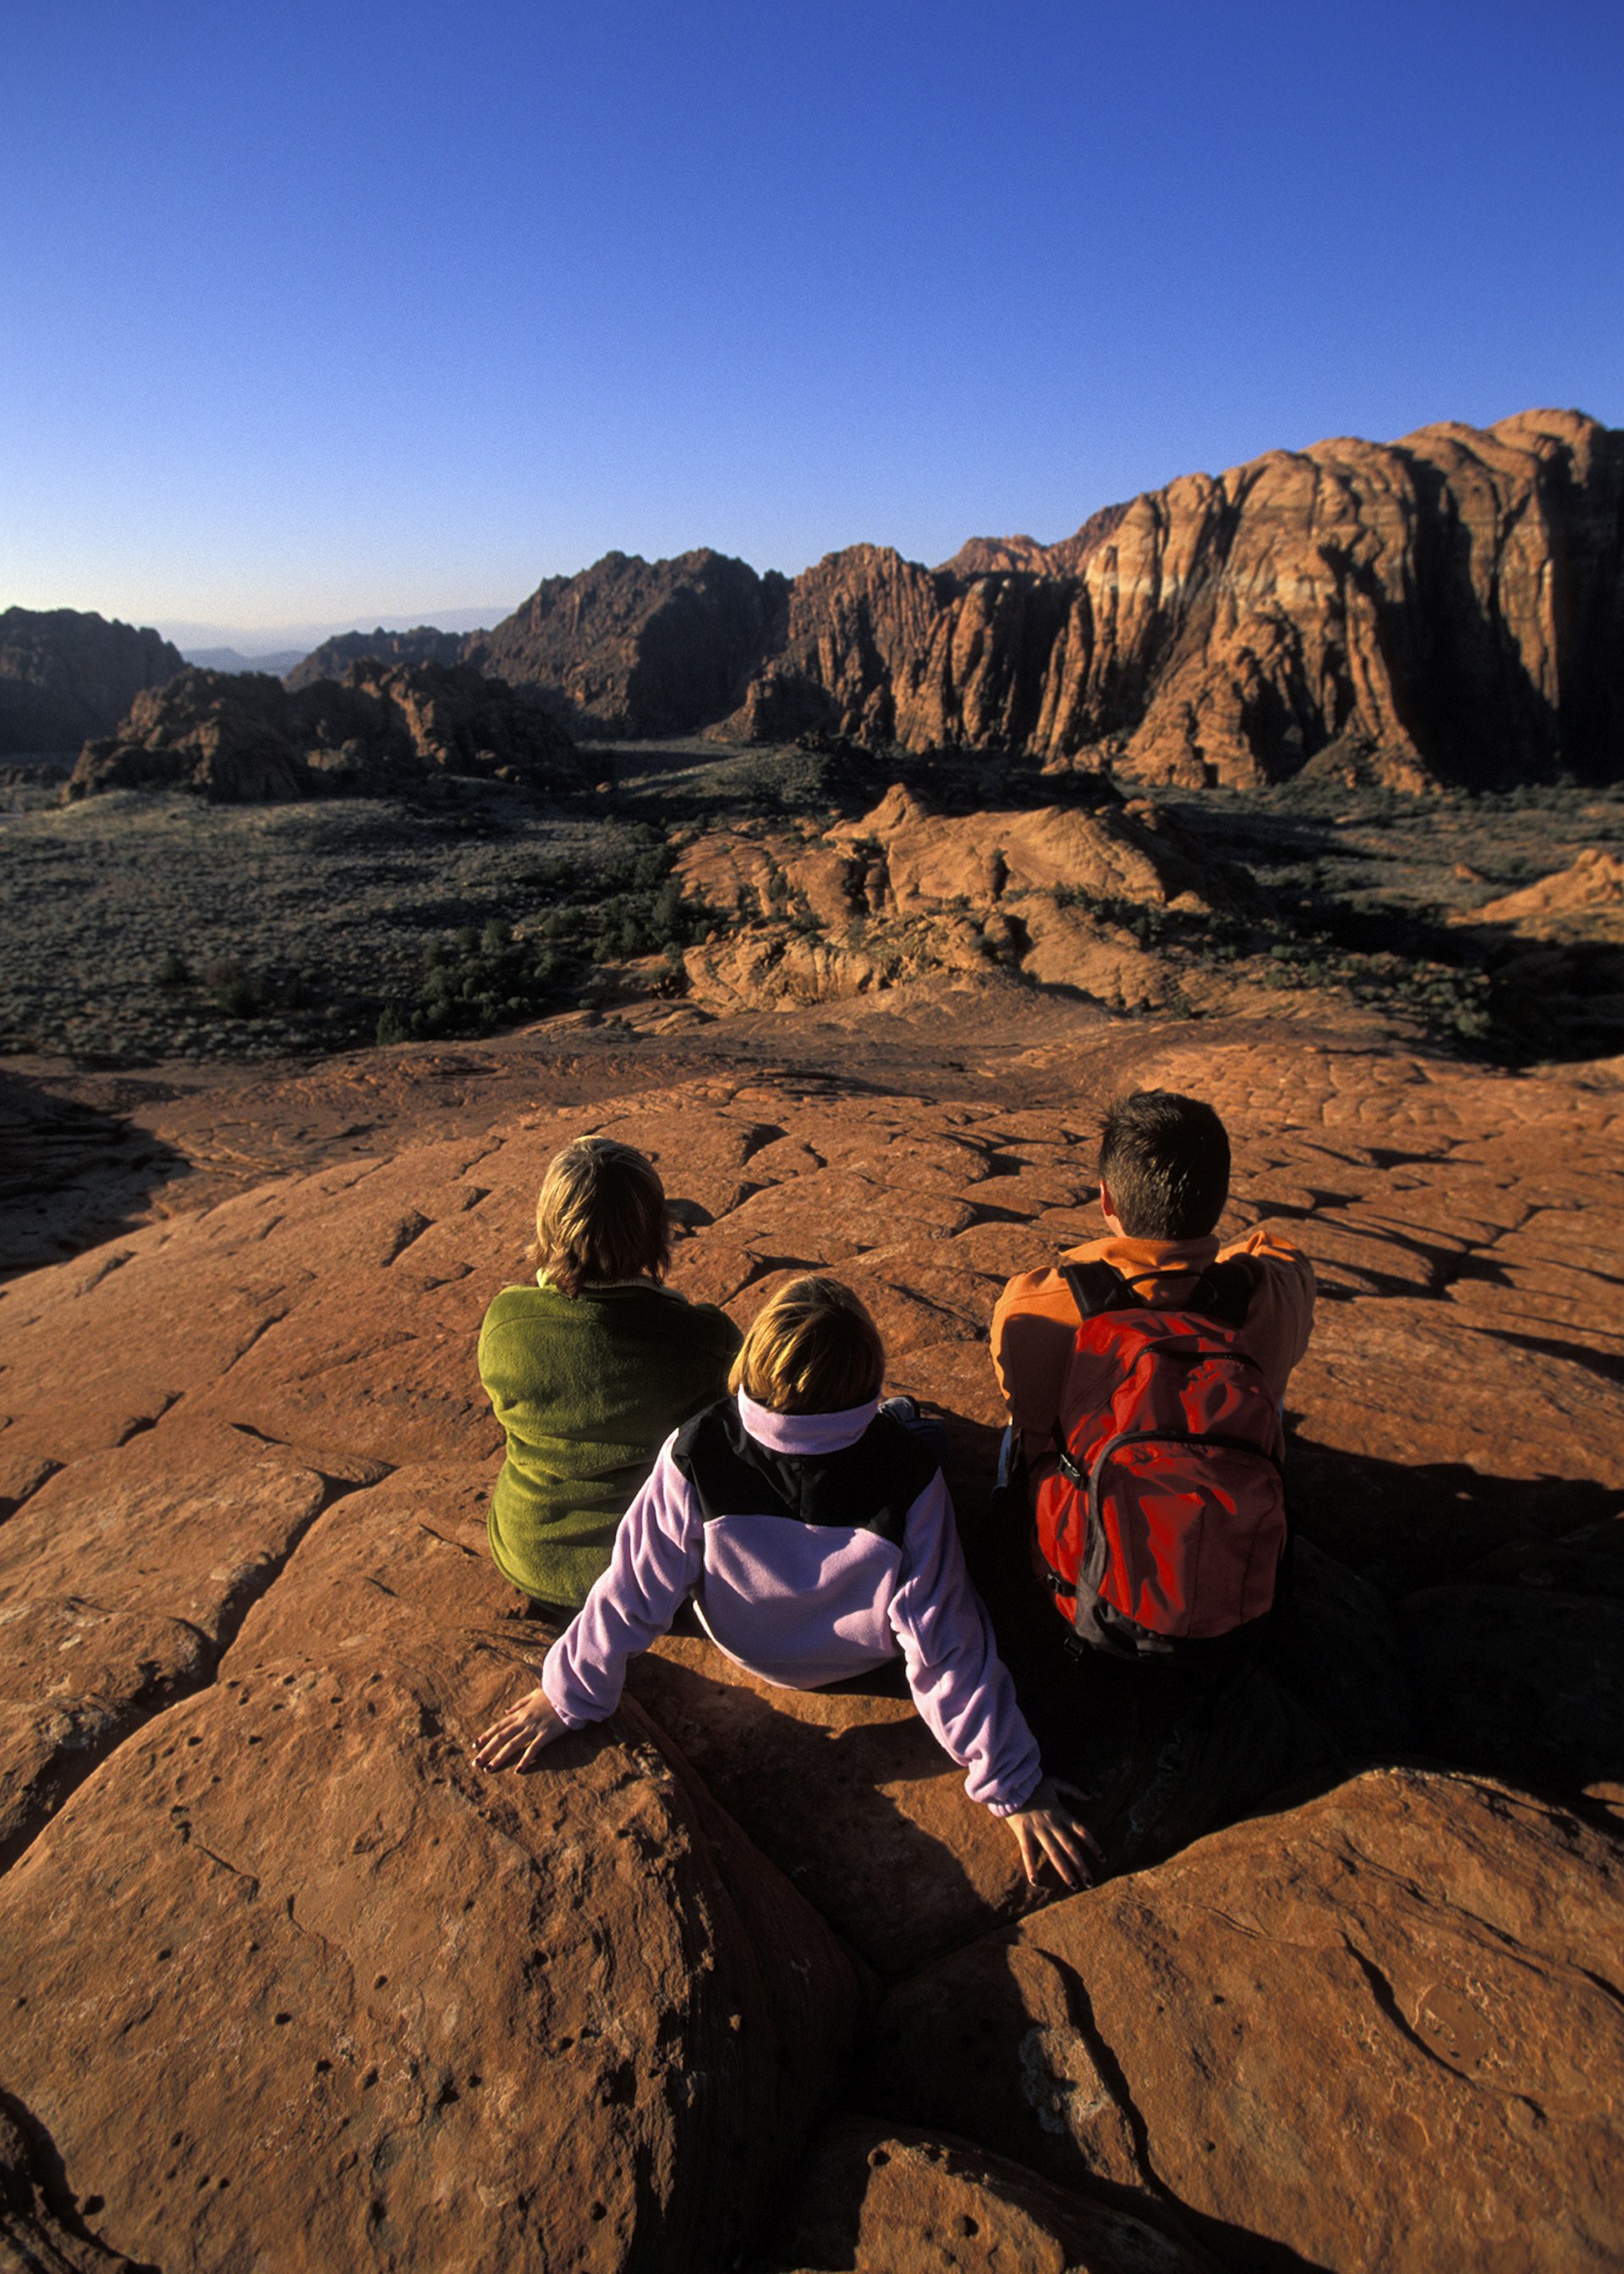 A family enjoying the view after a hike © Corey Rich / Getty Images